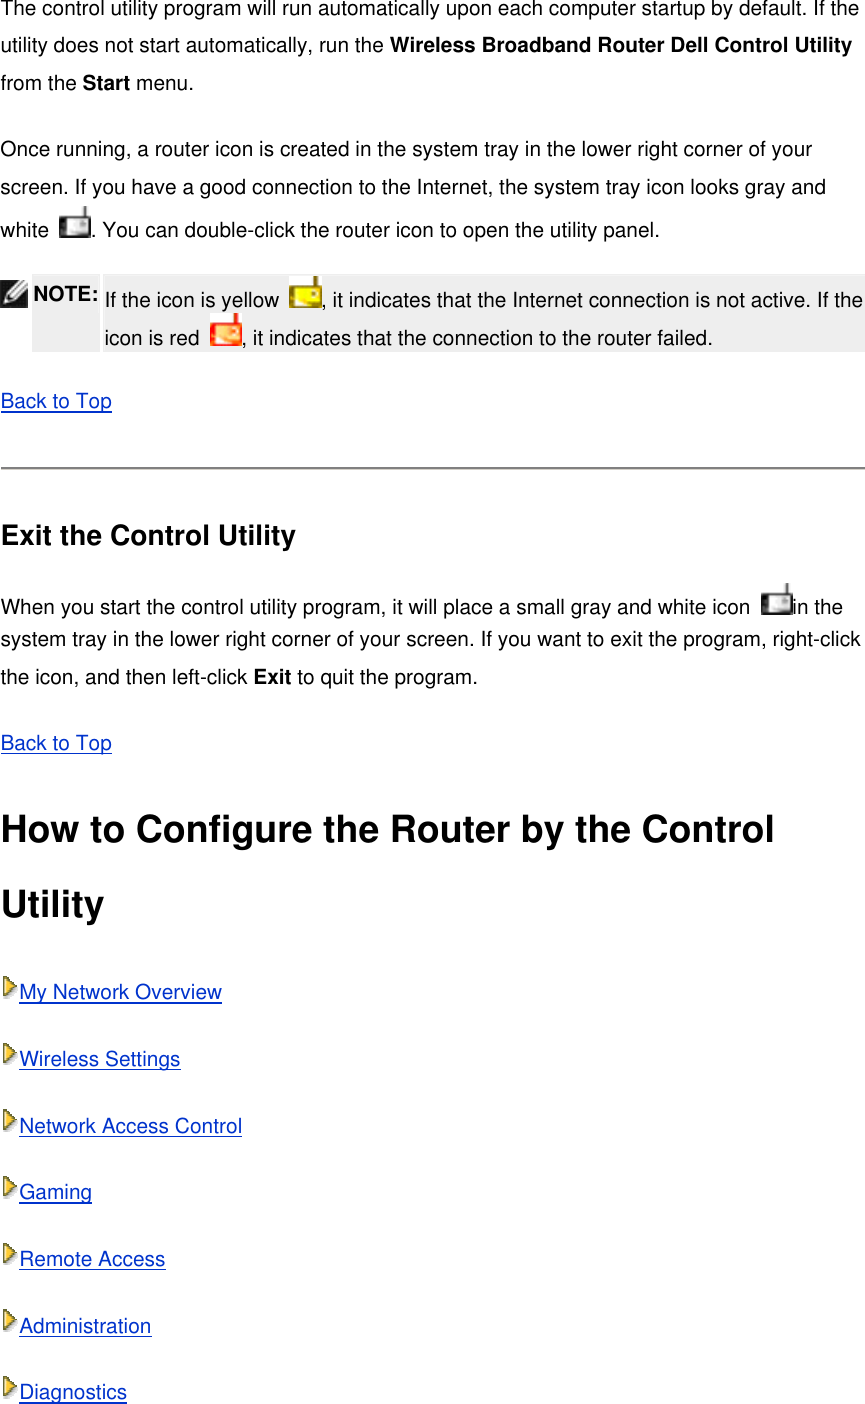 The control utility program will run automatically upon each computer startup by default. If the utility does not start automatically, run the Wireless Broadband Router Dell Control Utility from the Start menu. Once running, a router icon is created in the system tray in the lower right corner of your screen. If you have a good connection to the Internet, the system tray icon looks gray and white  . You can double-click the router icon to open the utility panel.  NOTE: If the icon is yellow  , it indicates that the Internet connection is not active. If the icon is red  , it indicates that the connection to the router failed.   Back to Top  Exit the Control Utility When you start the control utility program, it will place a small gray and white icon  in the system tray in the lower right corner of your screen. If you want to exit the program, right-click the icon, and then left-click Exit to quit the program. Back to Top How to Configure the Router by the Control Utility My Network Overview Wireless Settings Network Access Control Gaming Remote Access Administration Diagnostics 